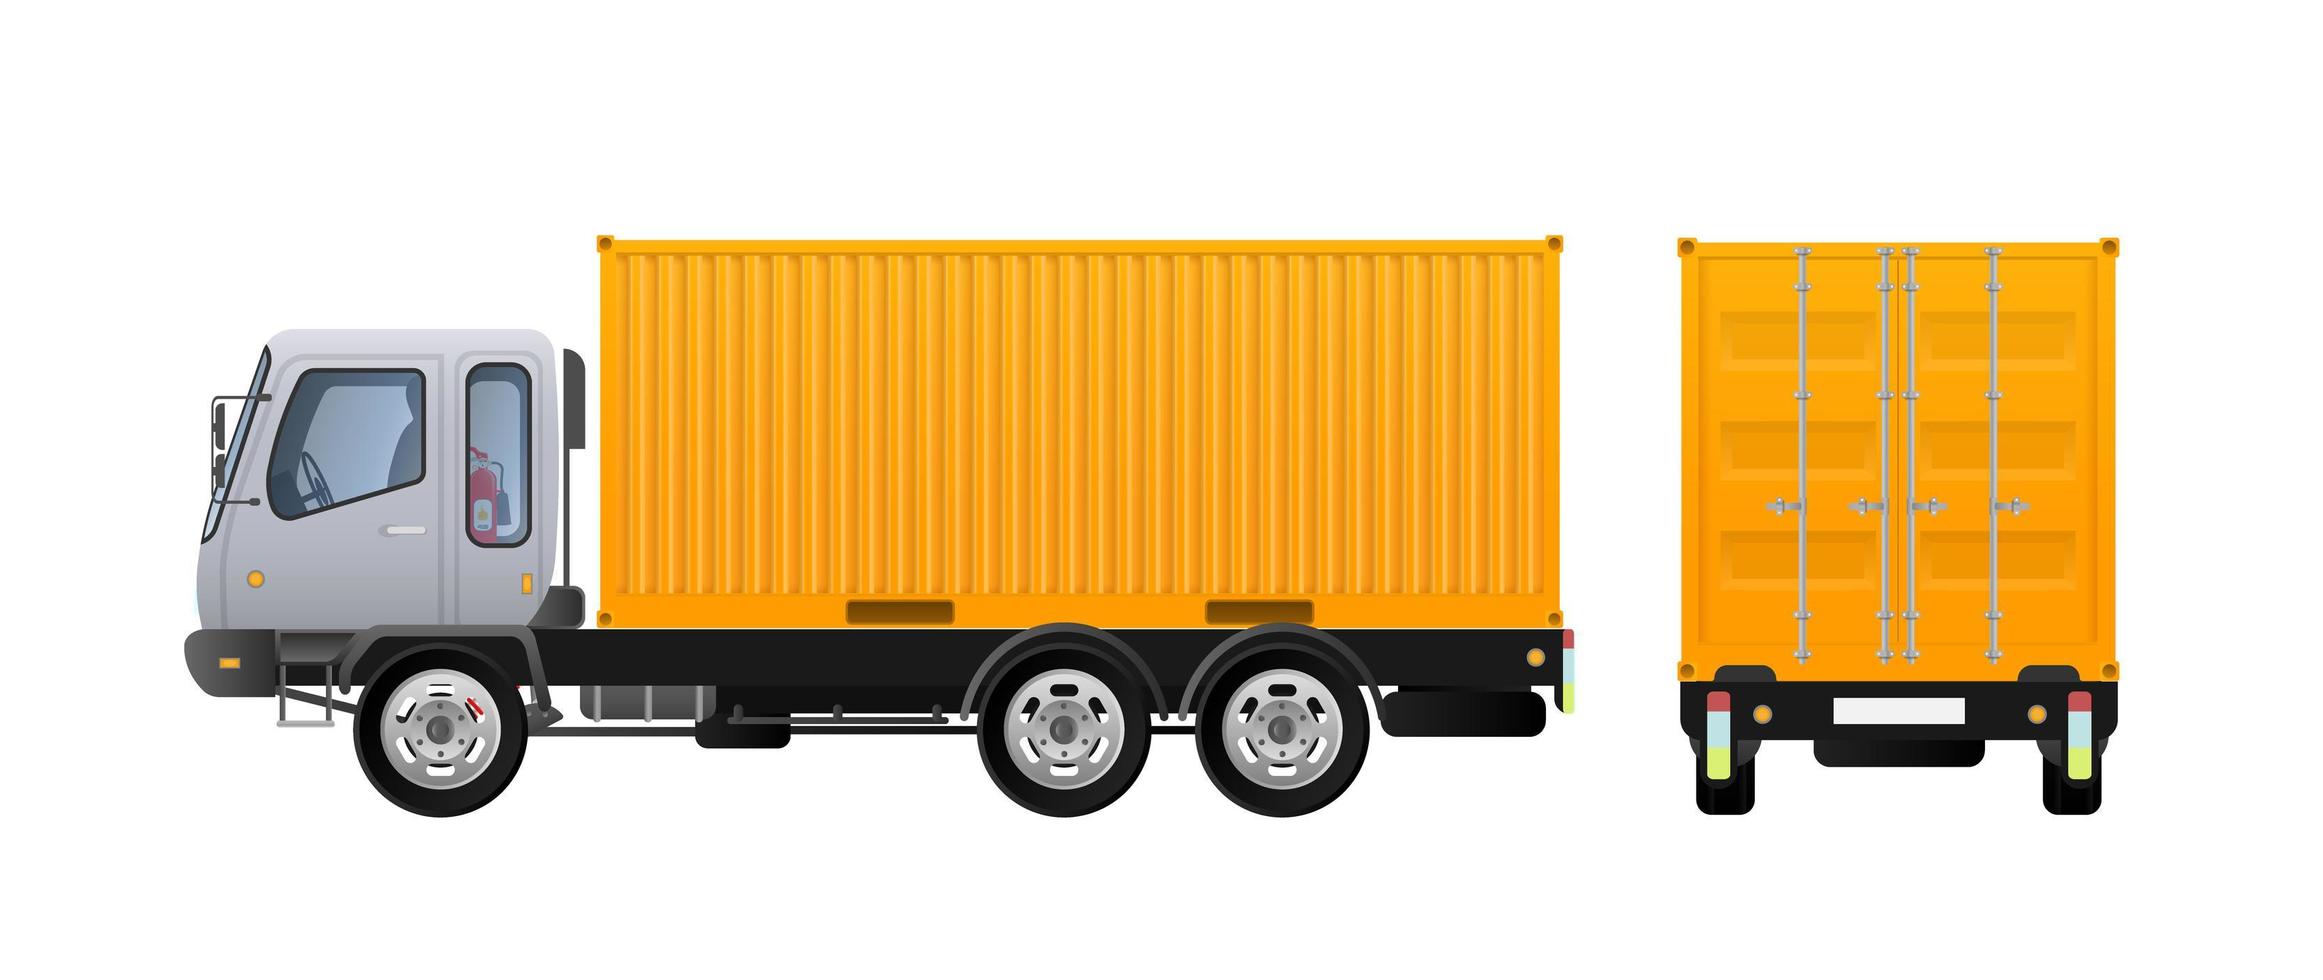 Vector truck side view. Delivery of cargo. Solid and flat color design. Yellow truck for transportation. Separately on a white background.